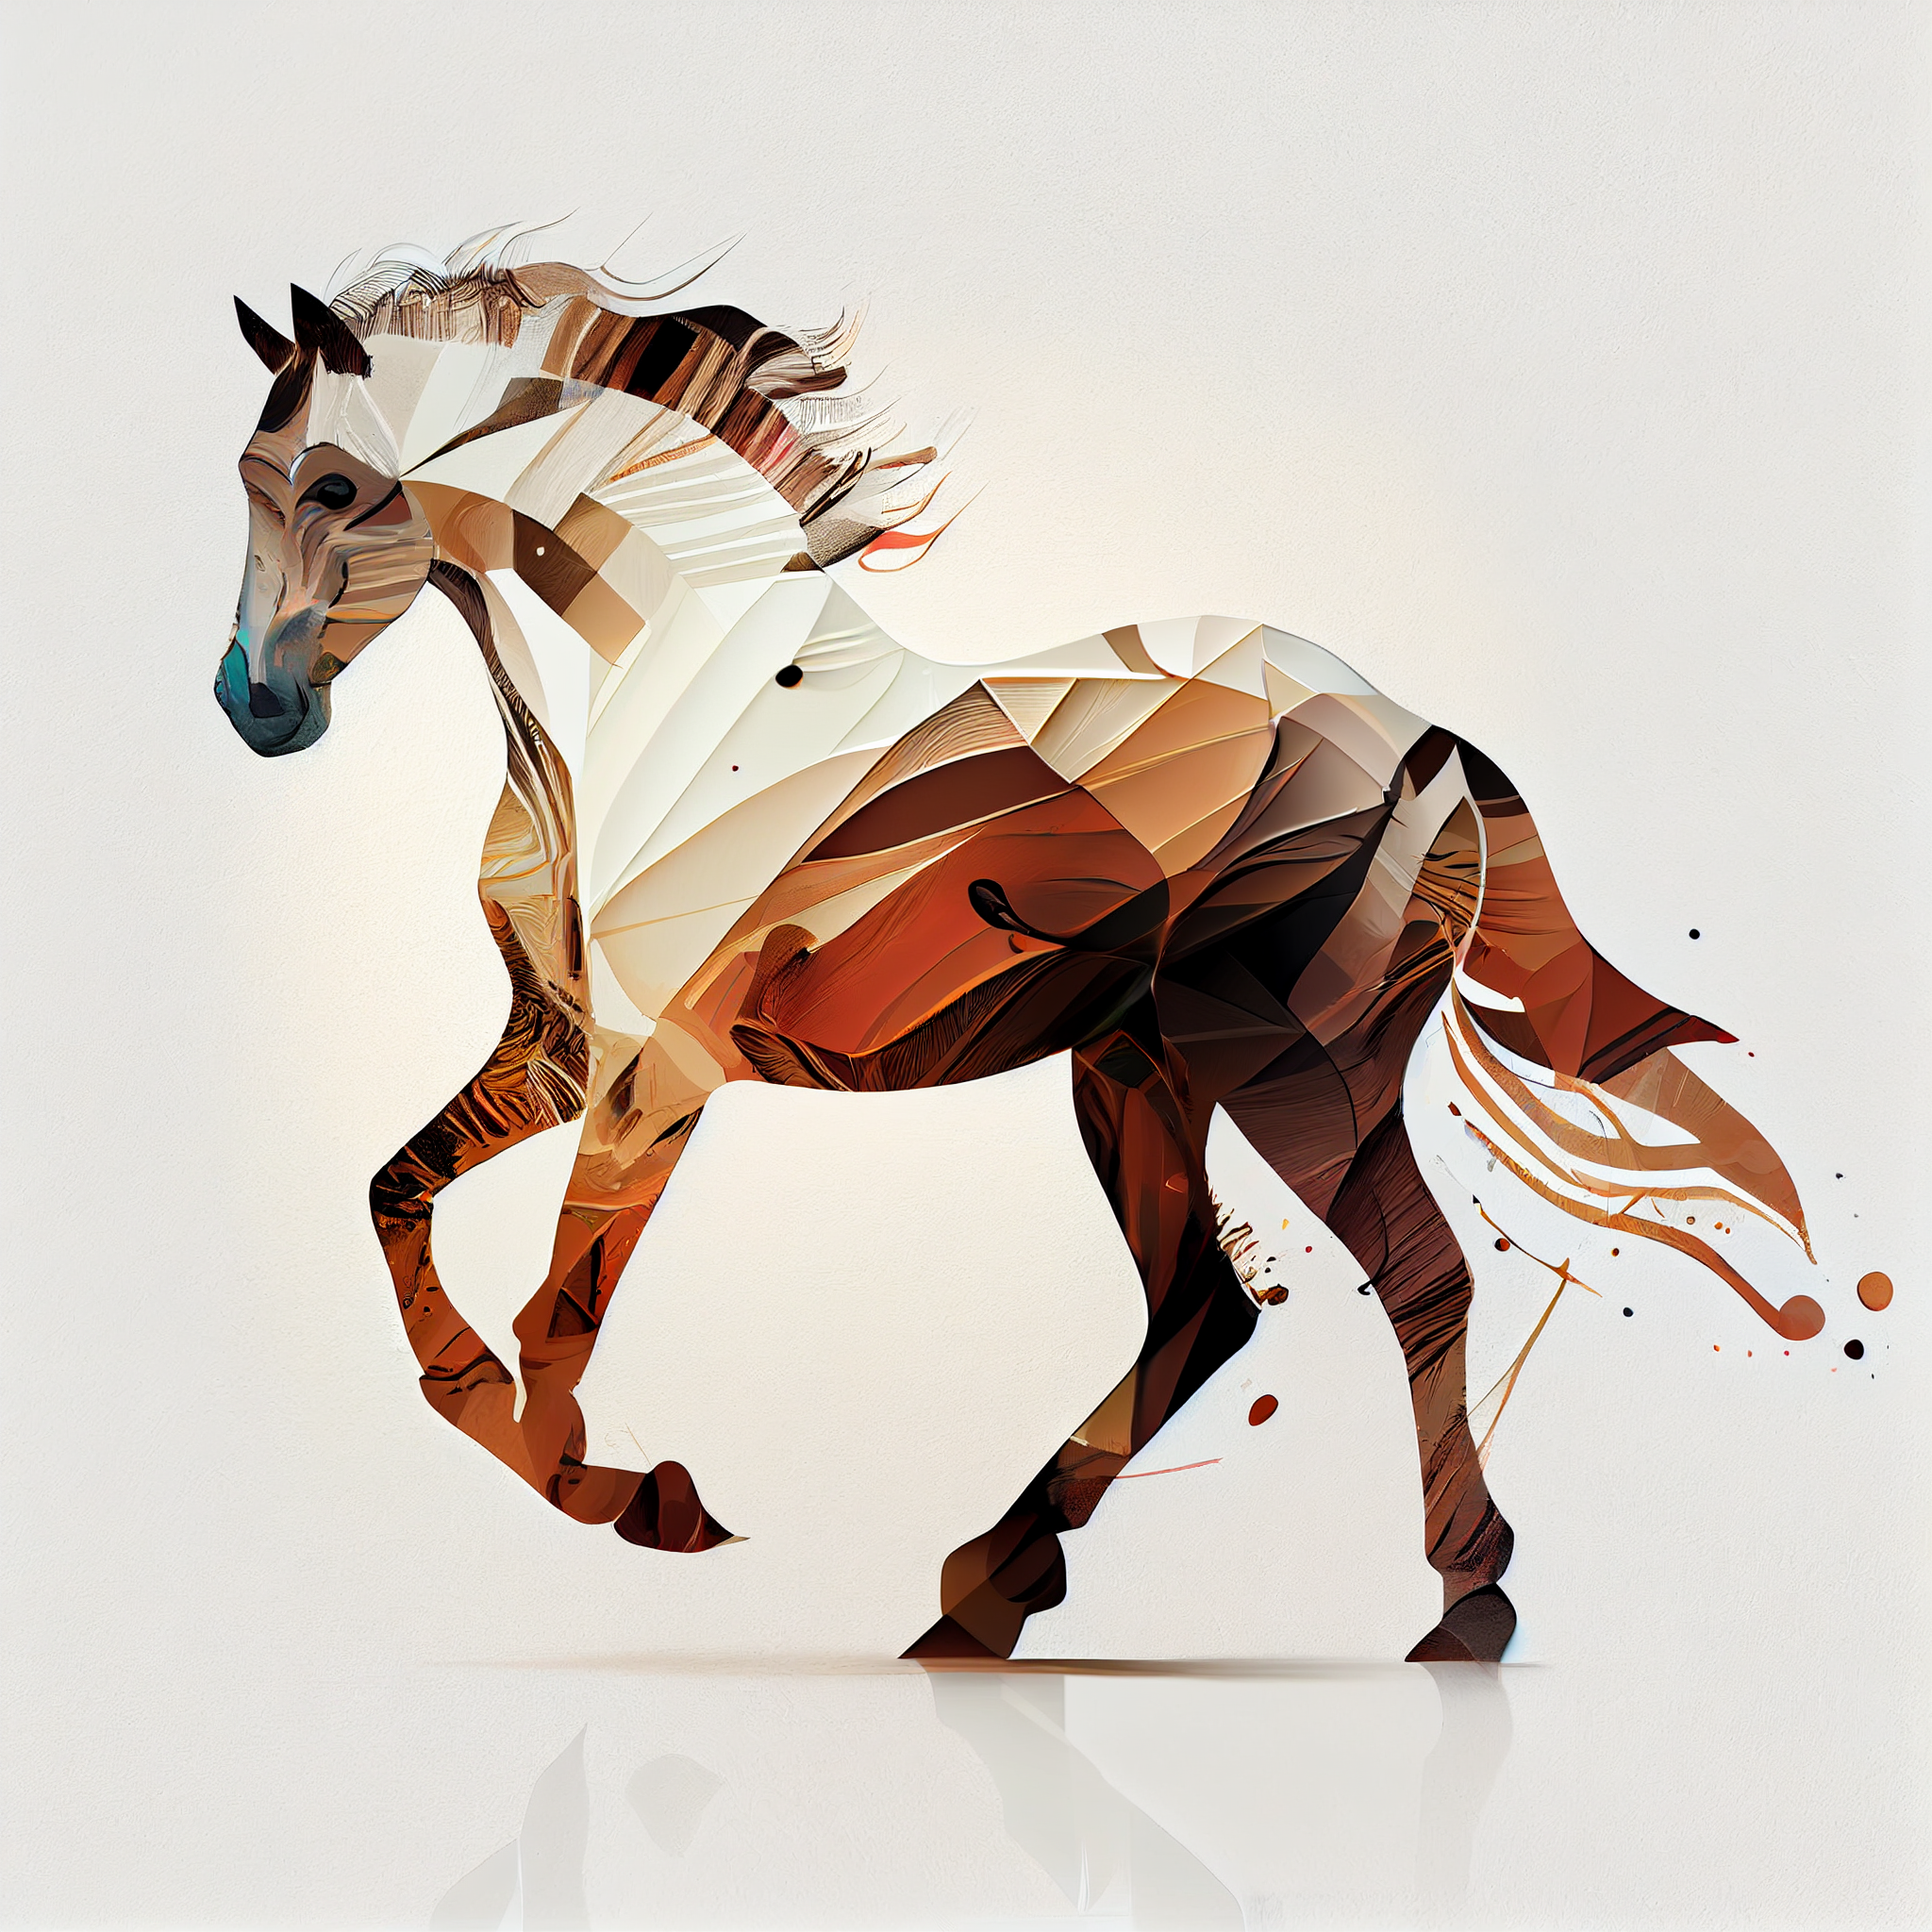 Abstract Elegance: Acrylic Color Print of a Majestic Horse in Shades of Brown - Perfect for Contemporary Wall Decor